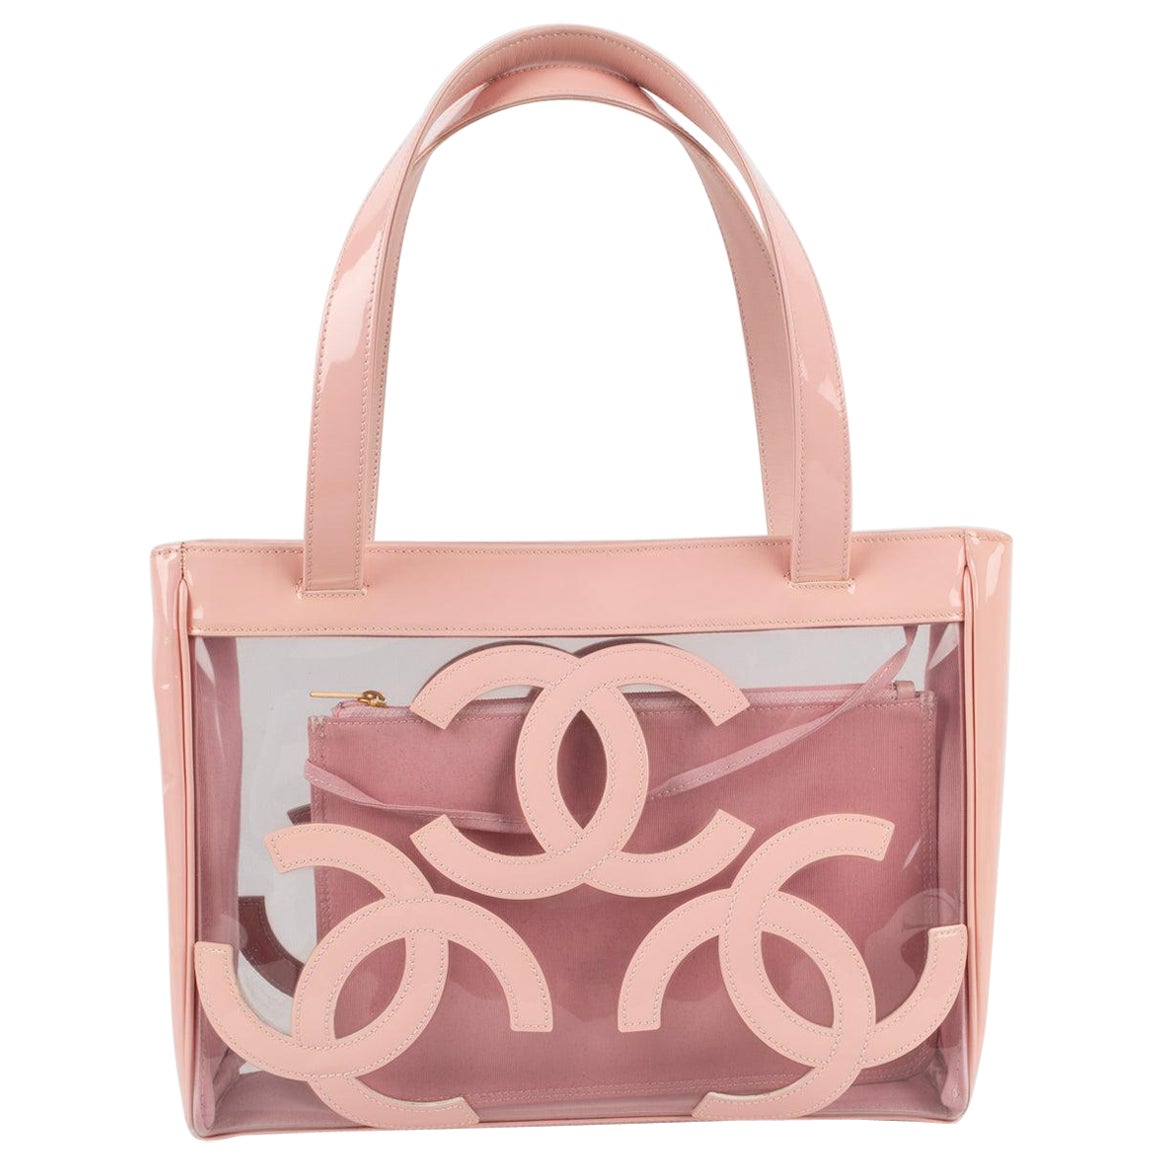 Chanel Pink Bag in Transparent Pvc Fabric and Patent Leather, 2004/2005 For Sale